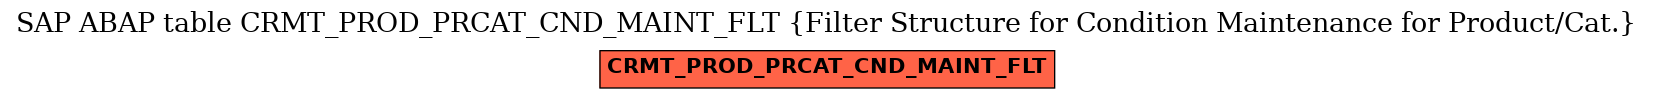 E-R Diagram for table CRMT_PROD_PRCAT_CND_MAINT_FLT (Filter Structure for Condition Maintenance for Product/Cat.)